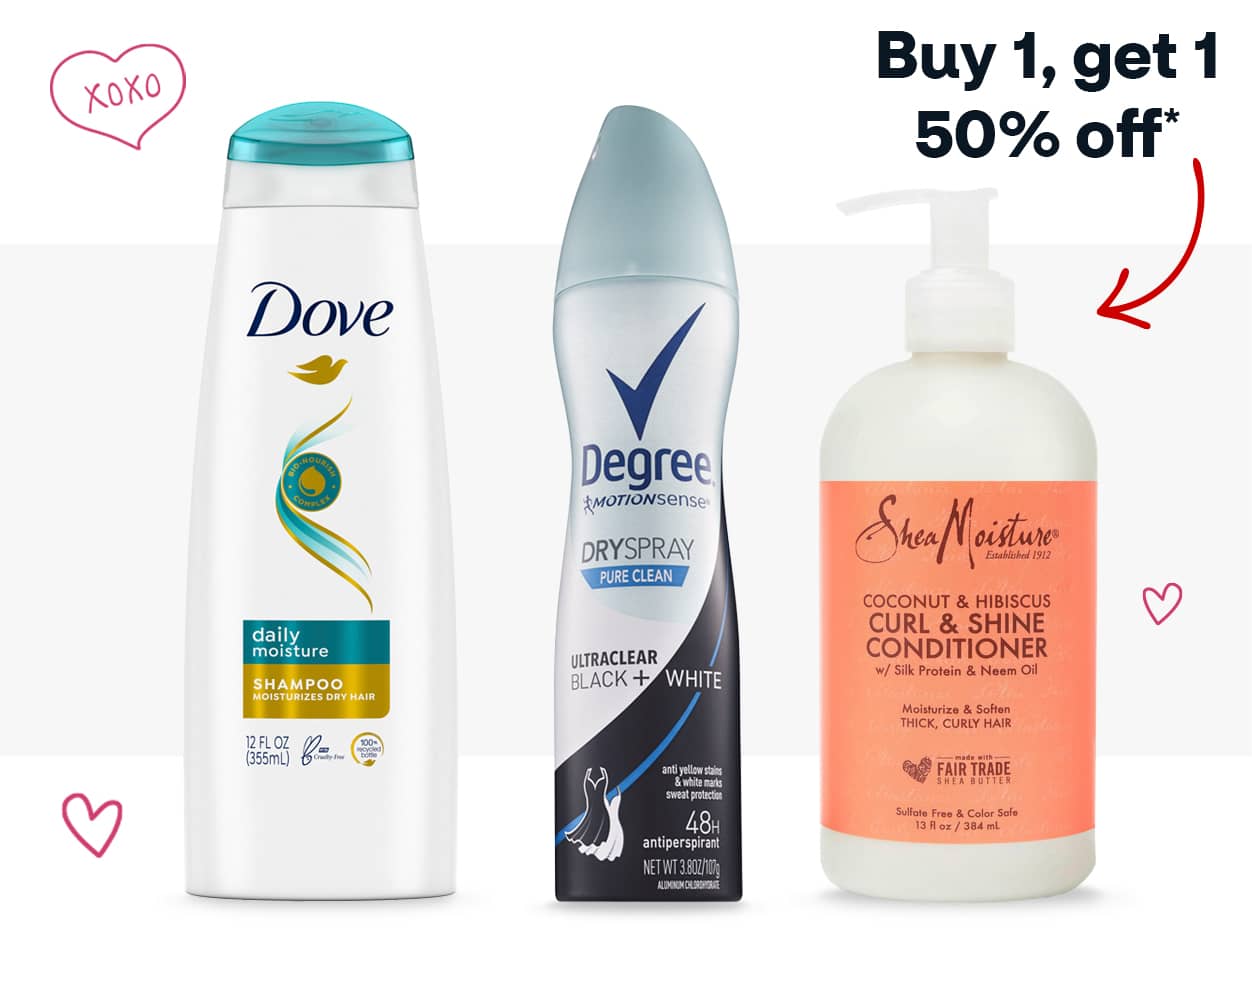 Shop for Dove, Degree, SheaMoisture and more, buy one, get one 50 percent off*